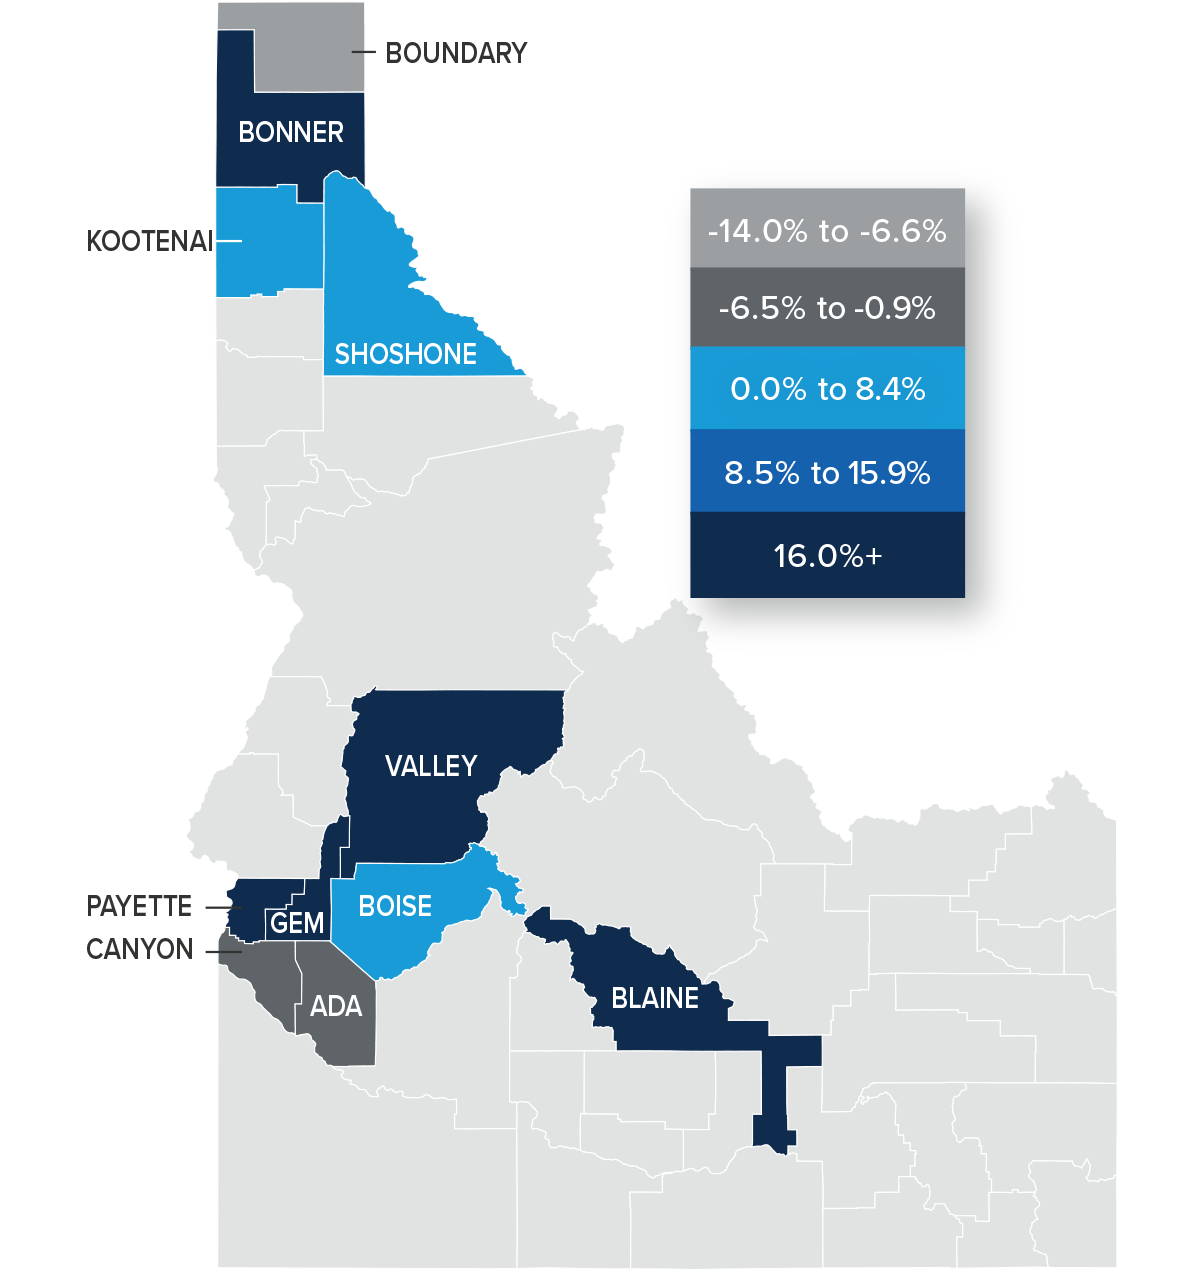 A map showing the real estate home prices percentage changes for various counties in Idaho. Different colors correspond to different tiers of percentage change. Bonner, Valley, Gem, Payette, and Blaine had changes of more than 16% and are represented in the corresponding navy color. Kootenai, Shoshone, and Boise Counties were in the 0-8.8% range. Canyon and Ada were in the -0.9 to -6.5% range. Boundary County was in -6.6% to -14% range and is represented in the light grey color on the map.